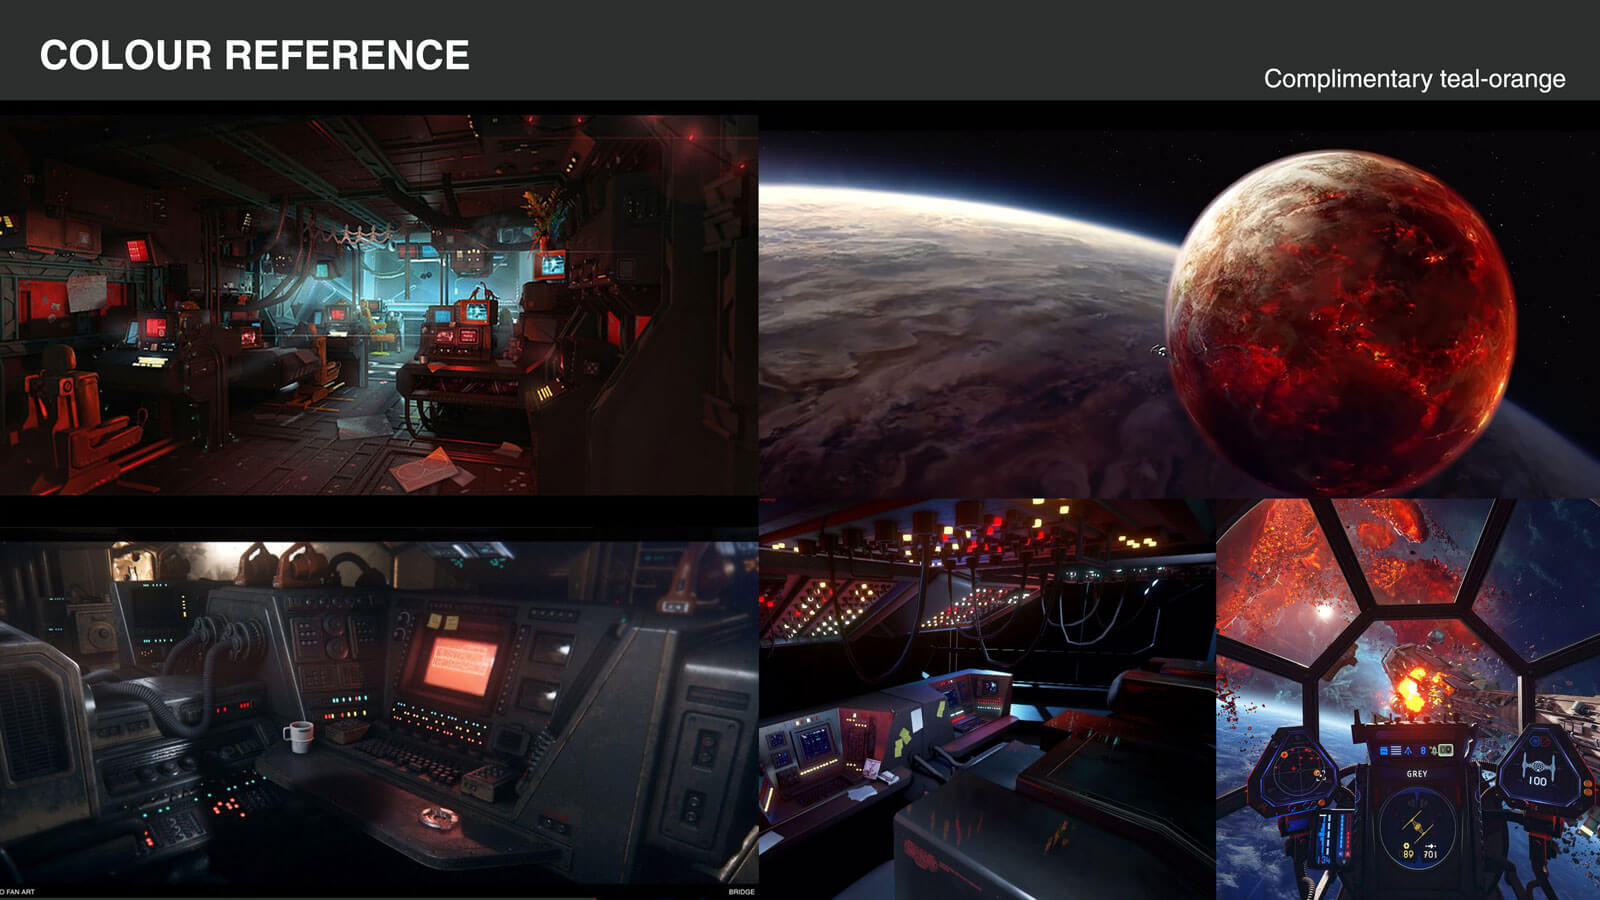 A collage of color reference images of other 3D cockpit views